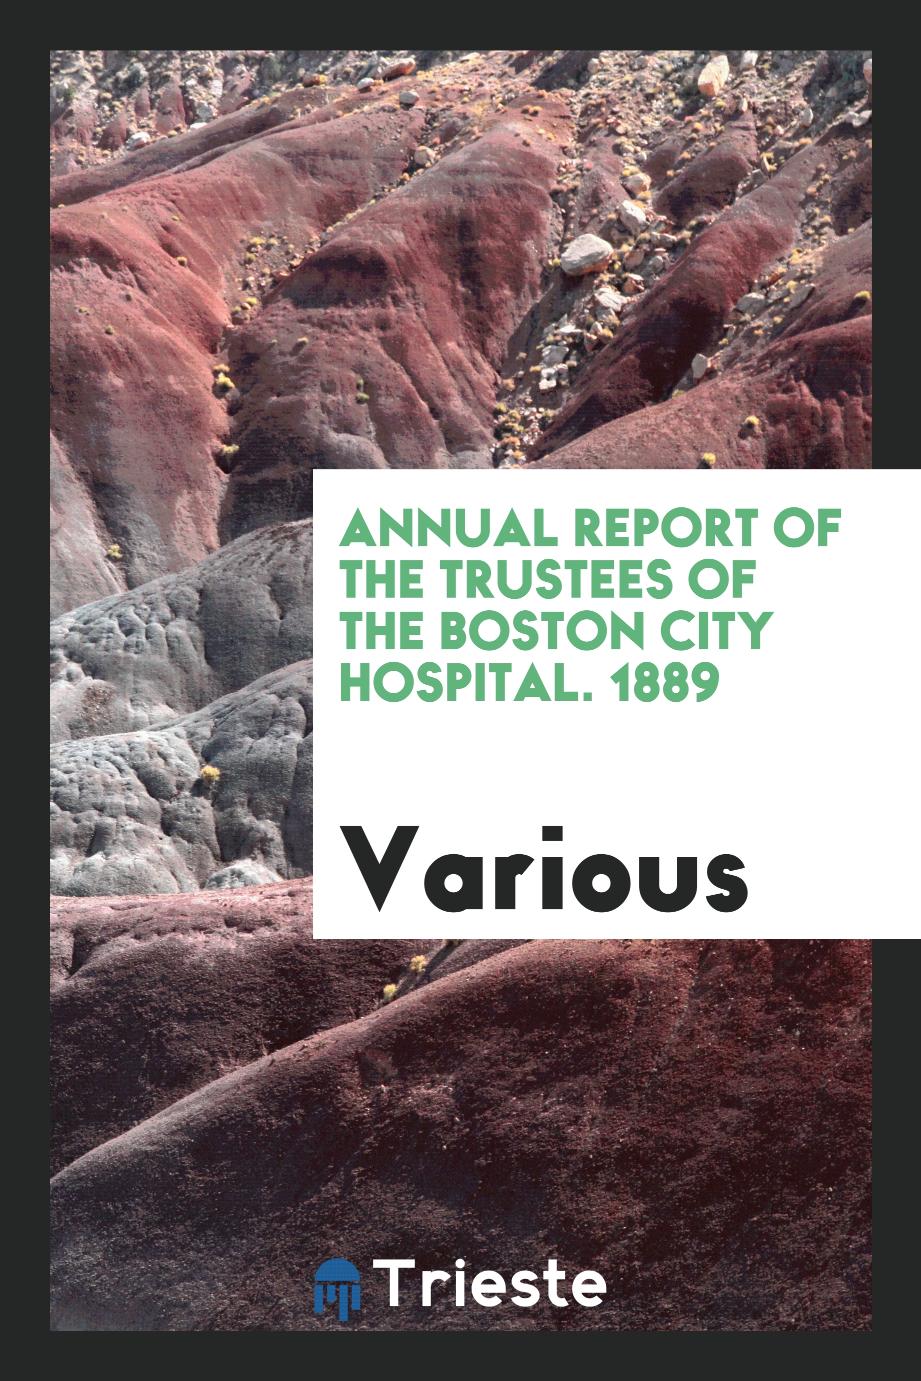 Annual report of the trustees of the Boston City Hospital. 1889